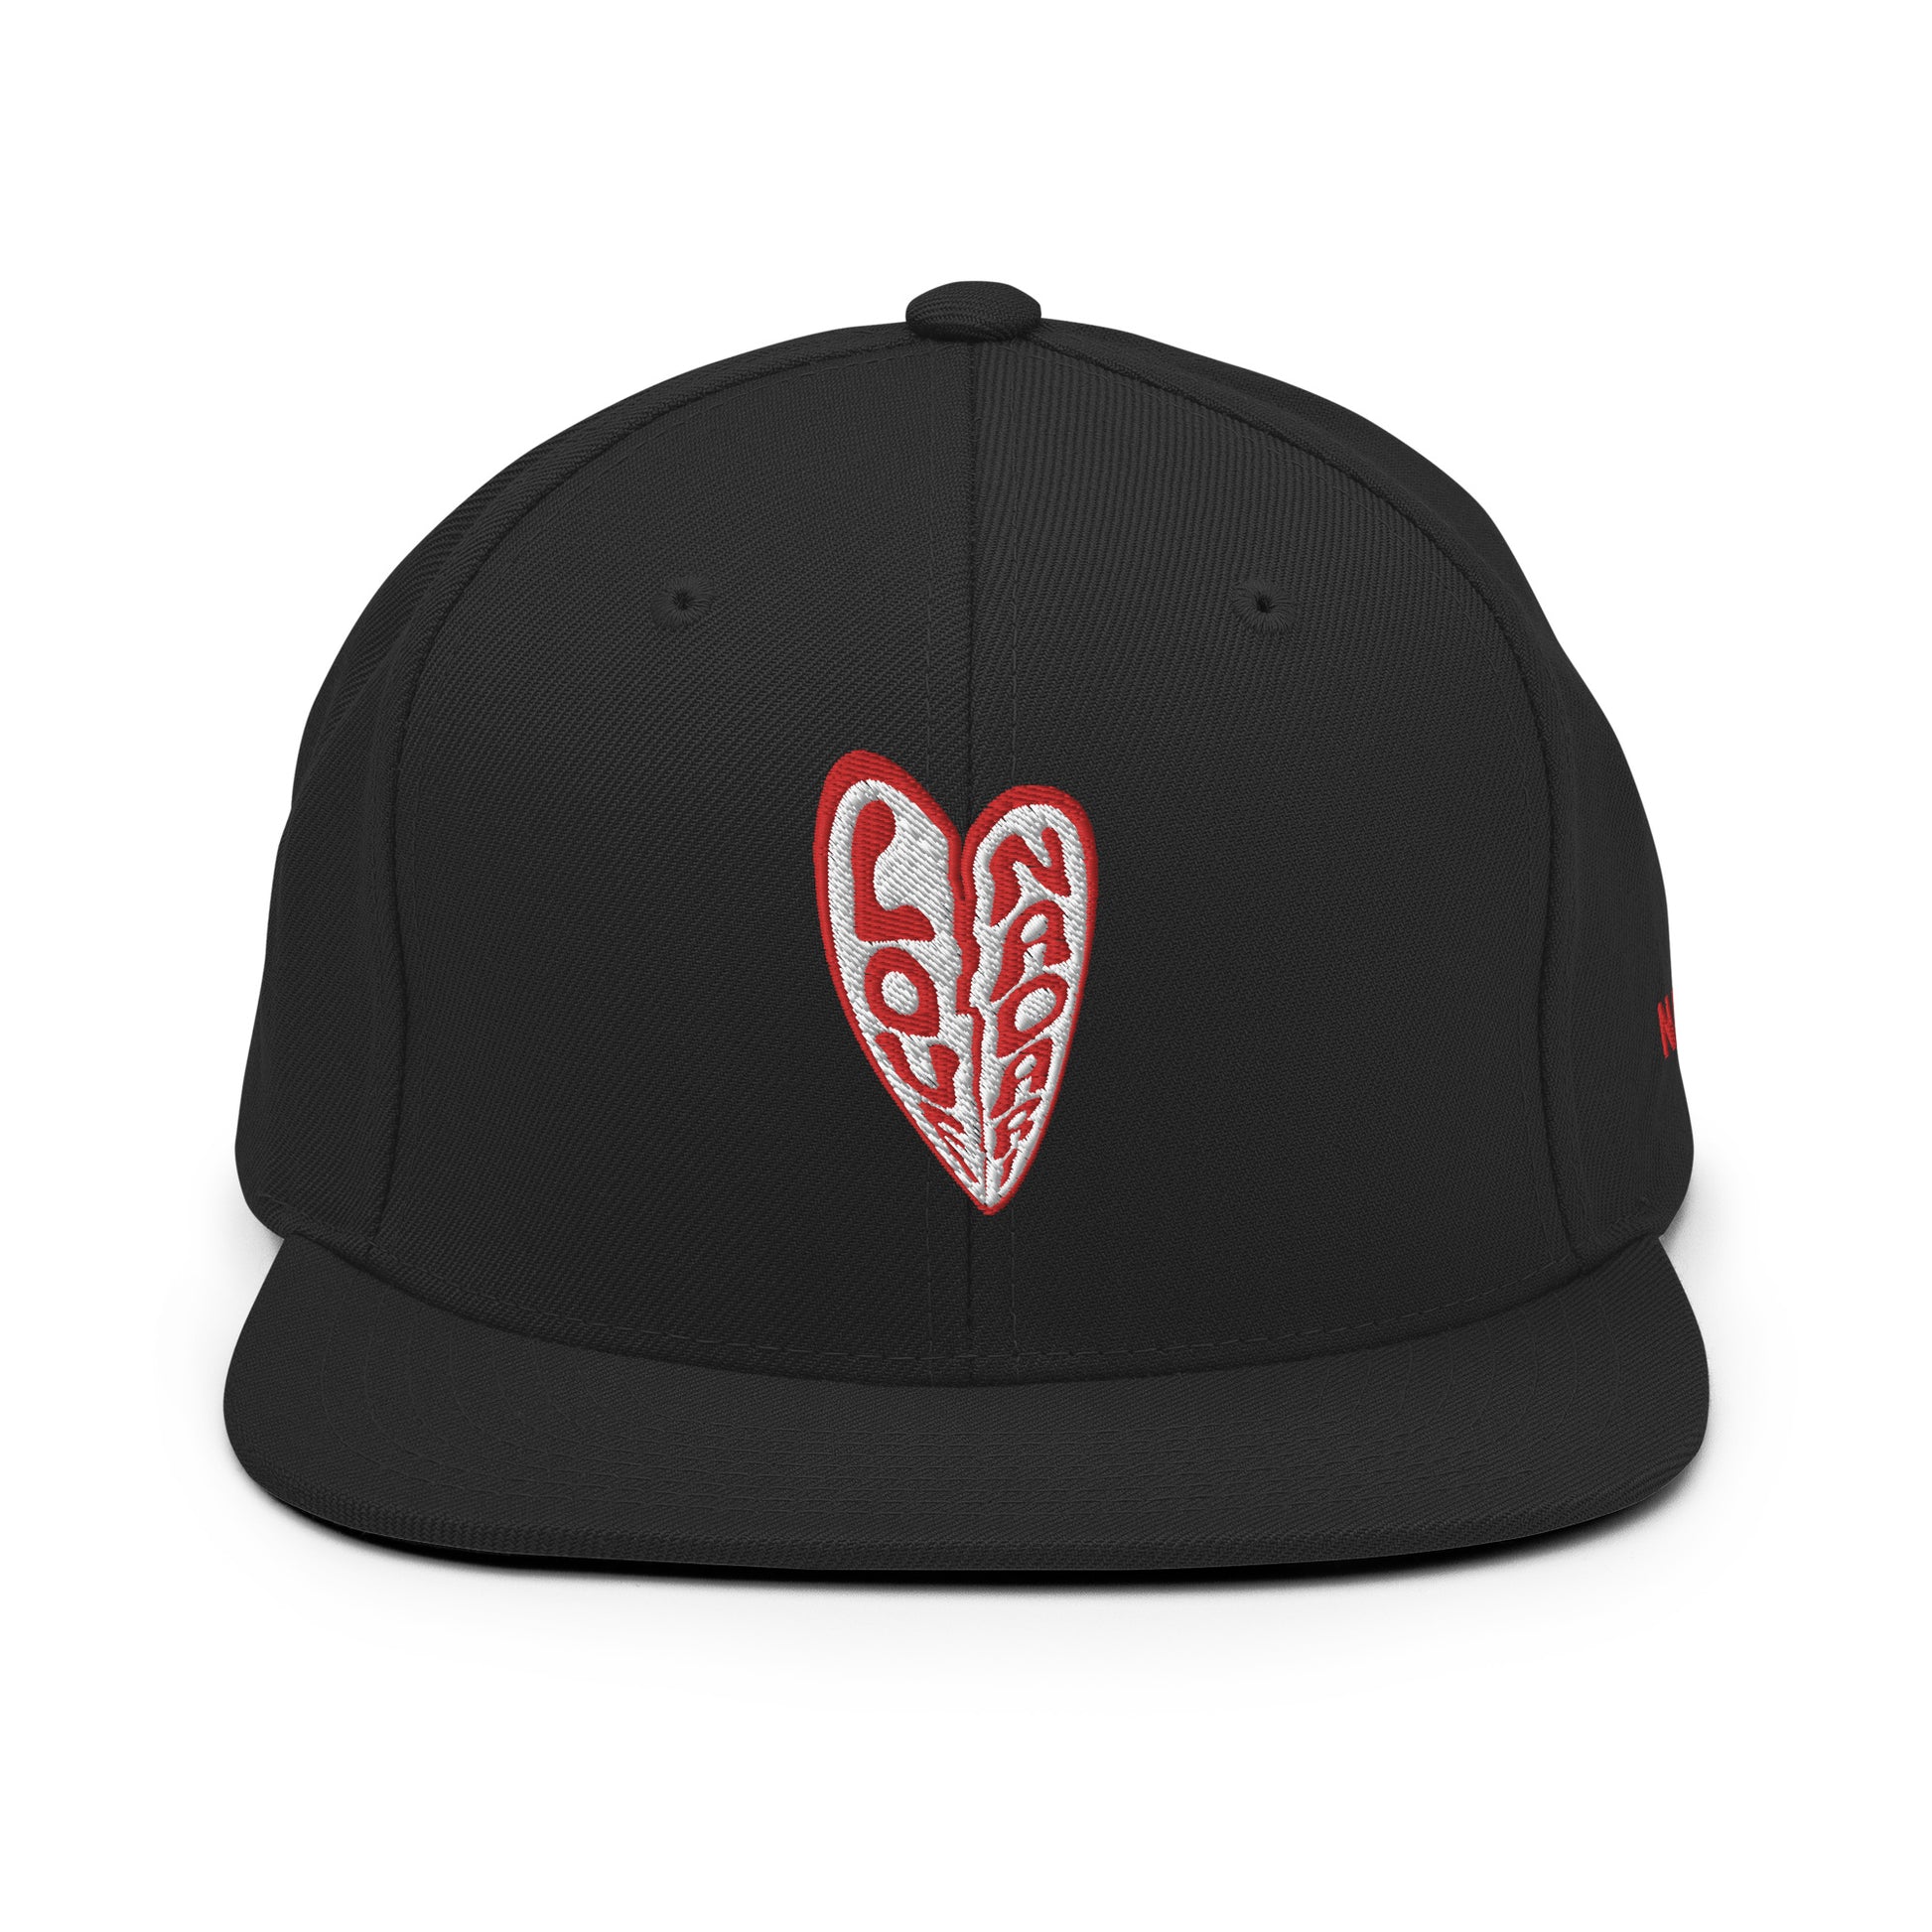 Warped Love snapback black, candy and white.